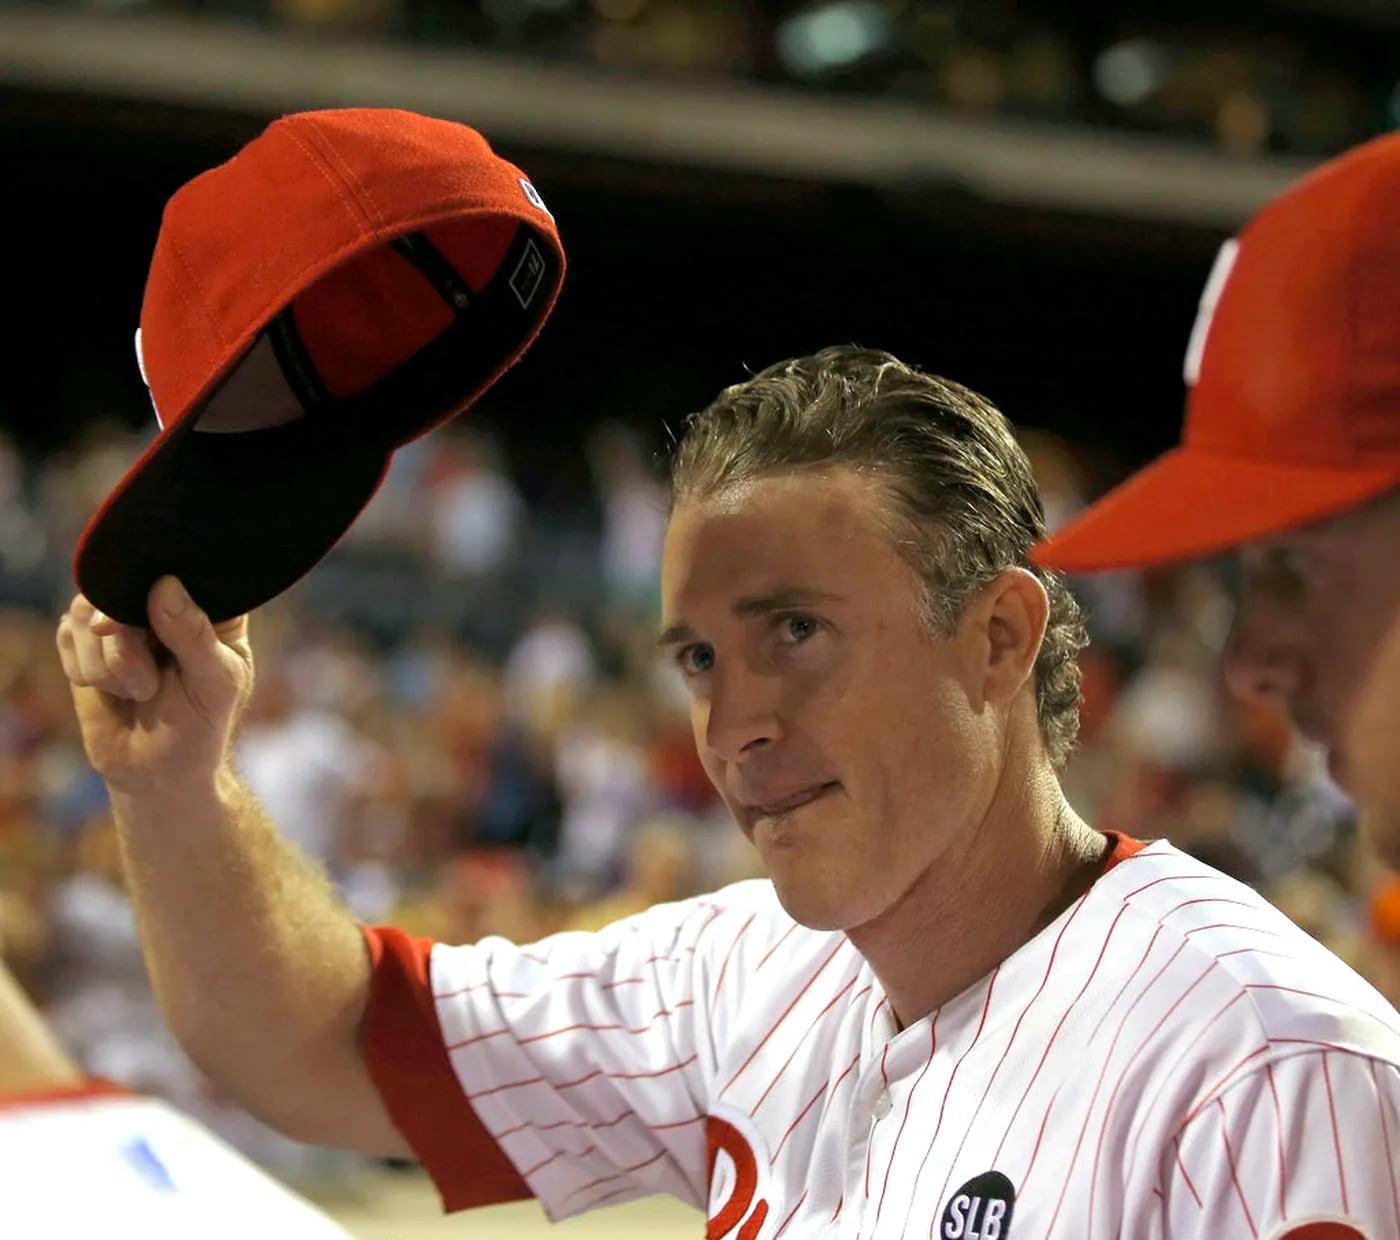 After 16 seasons, Phillies legend Chase Utley's ride through major